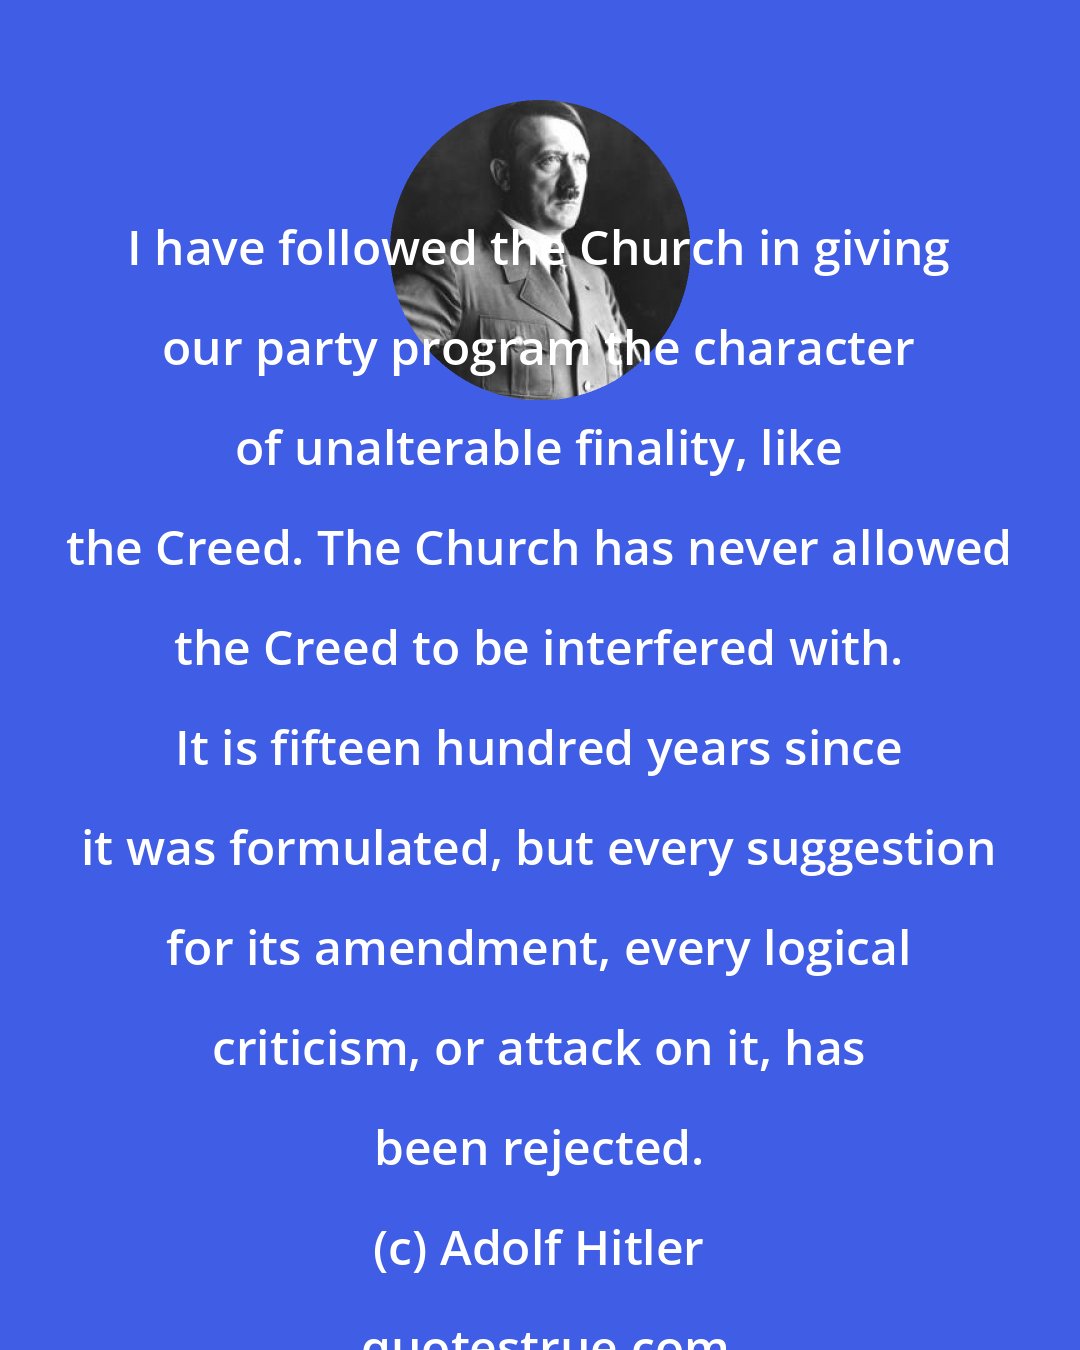 Adolf Hitler: I have followed the Church in giving our party program the character of unalterable finality, like the Creed. The Church has never allowed the Creed to be interfered with. It is fifteen hundred years since it was formulated, but every suggestion for its amendment, every logical criticism, or attack on it, has been rejected.